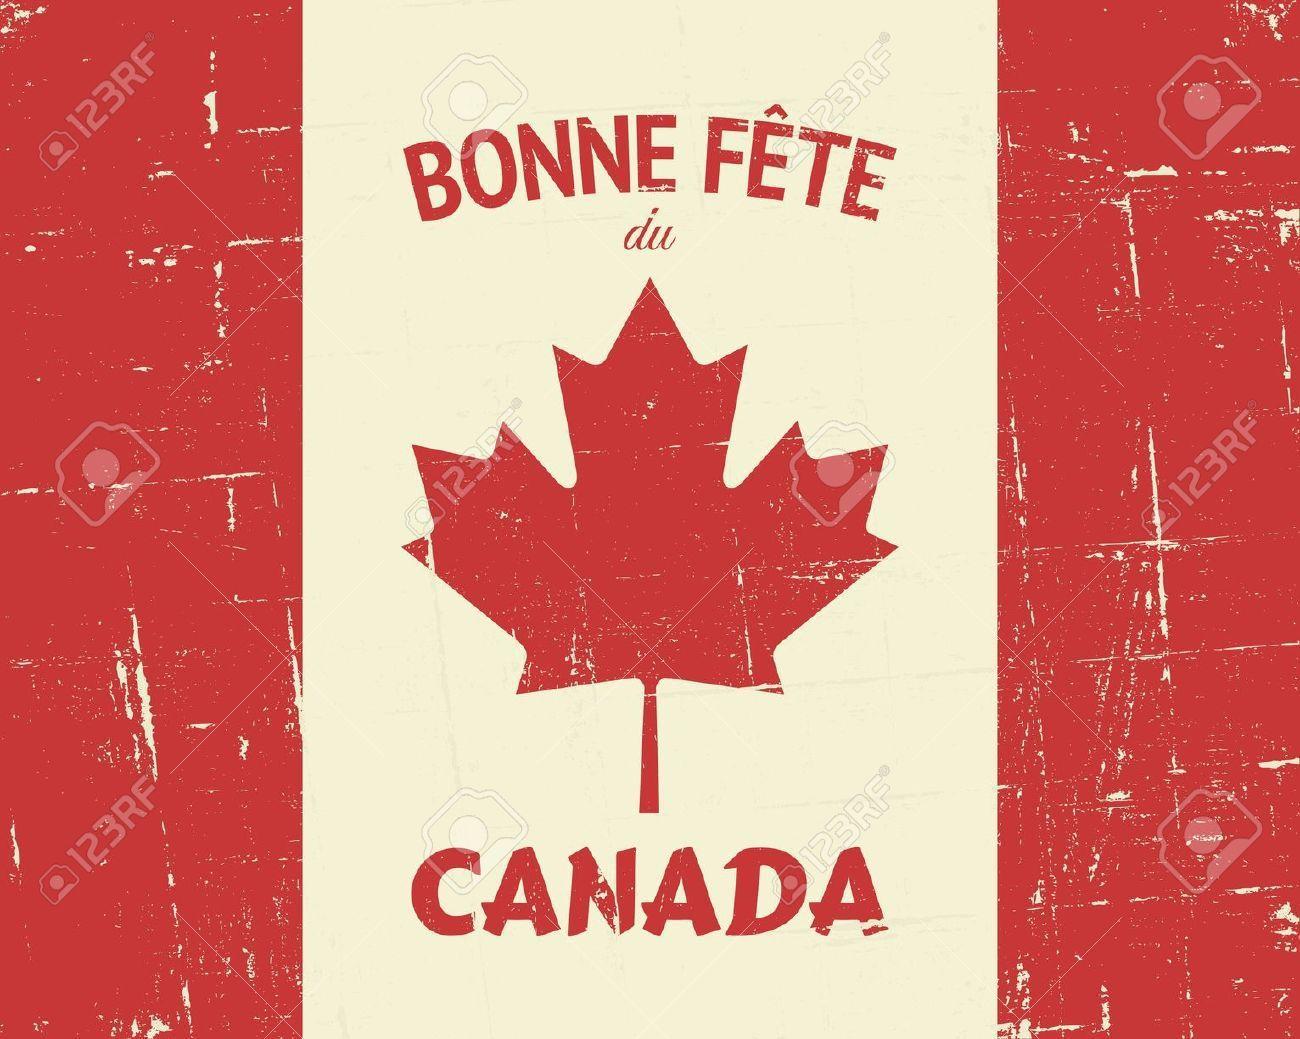 happy 1st of july canada day greetings image in french 2017